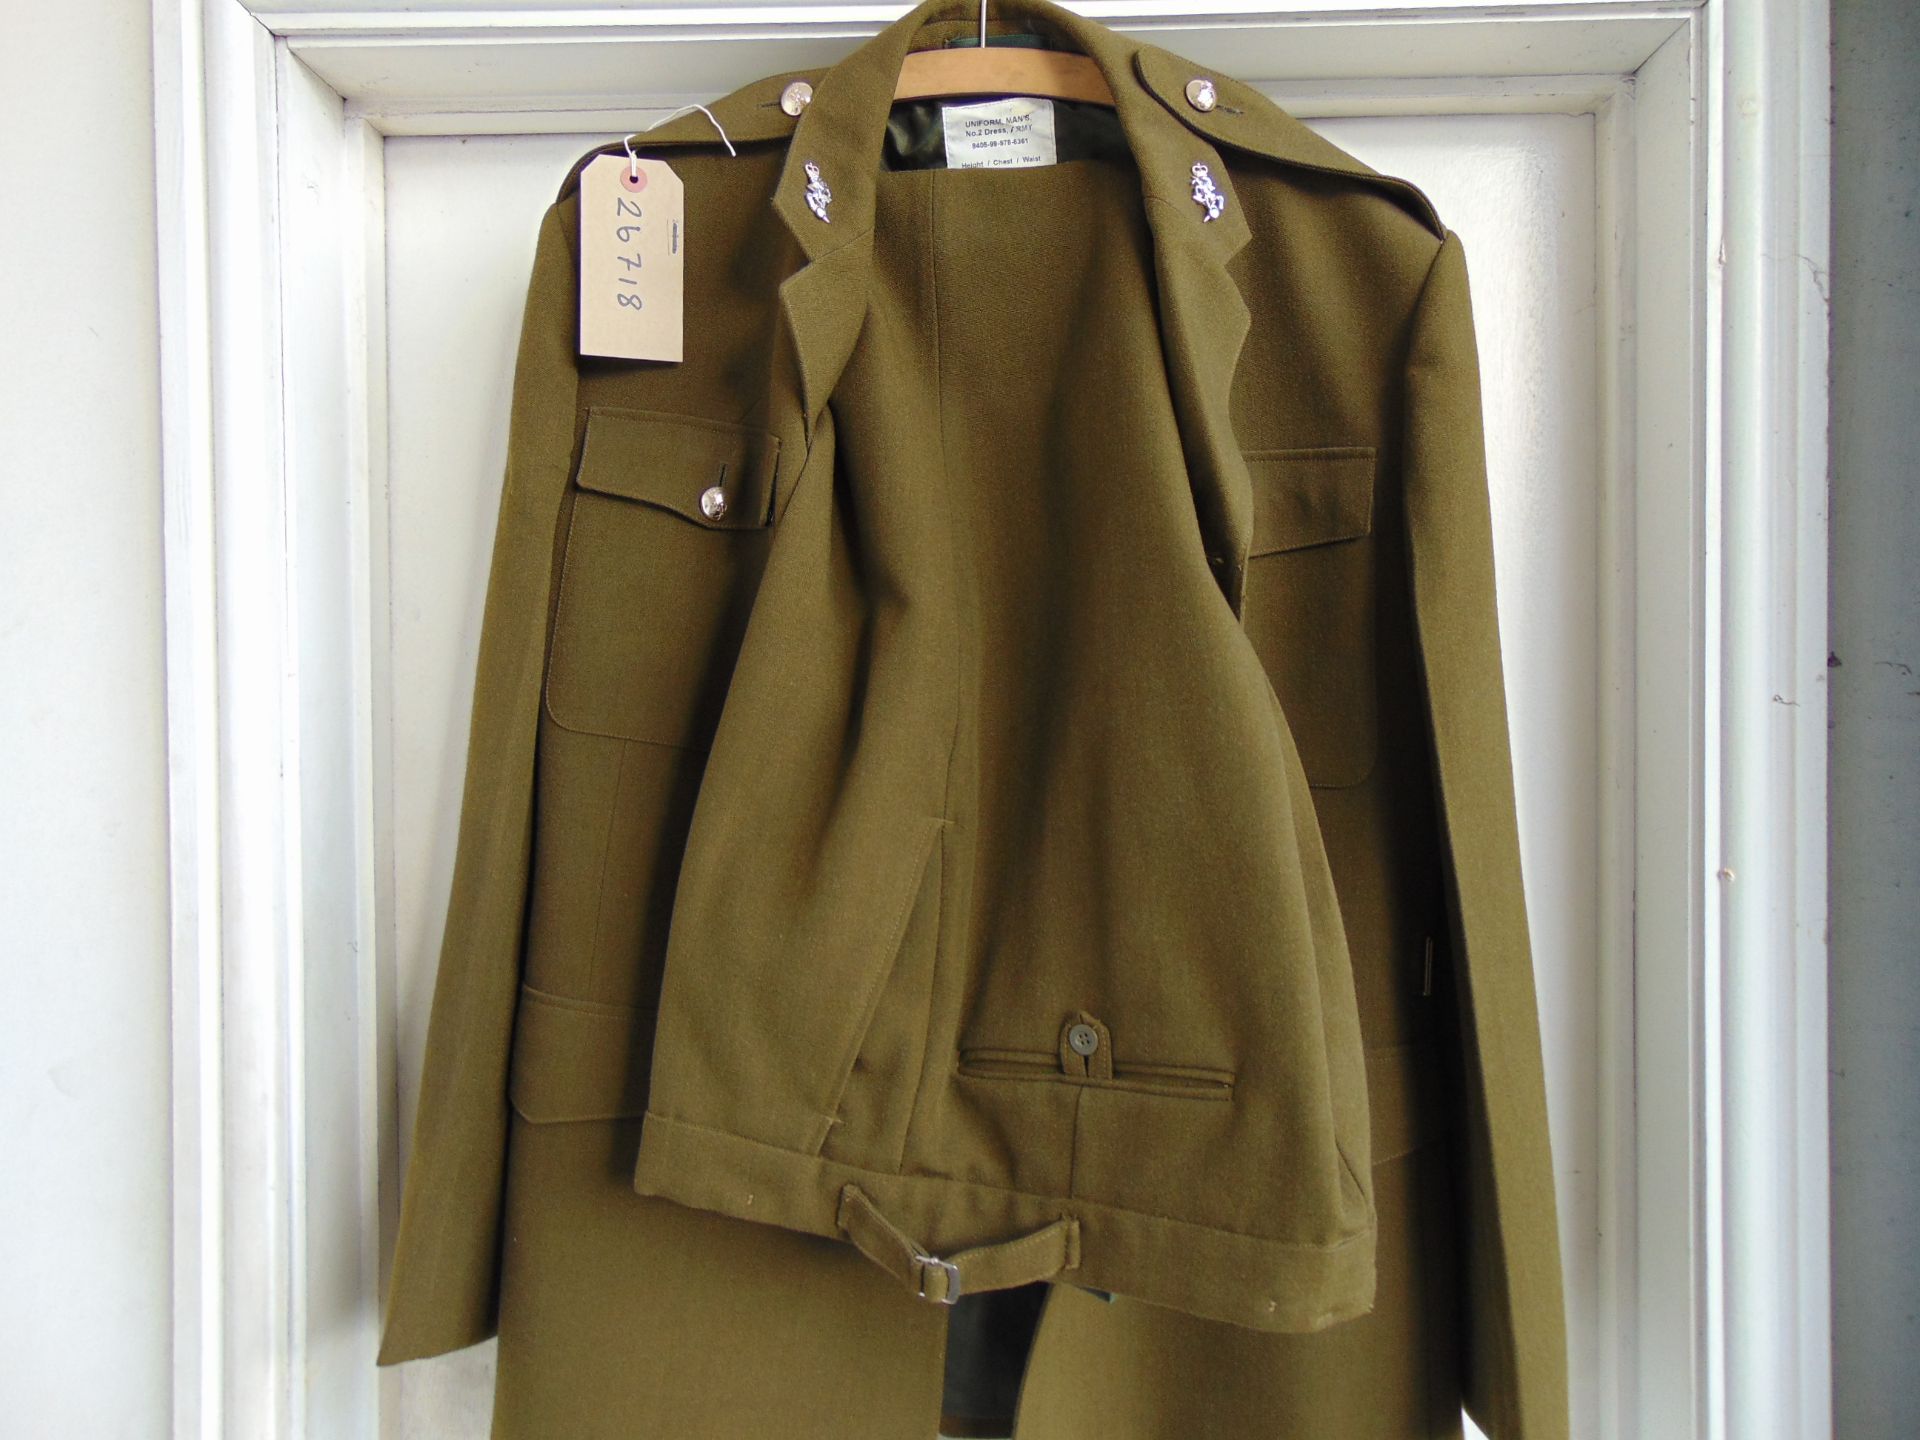 Unissued British Army REME No2 Dress Uniform Jacket and Trousers - Image 4 of 7